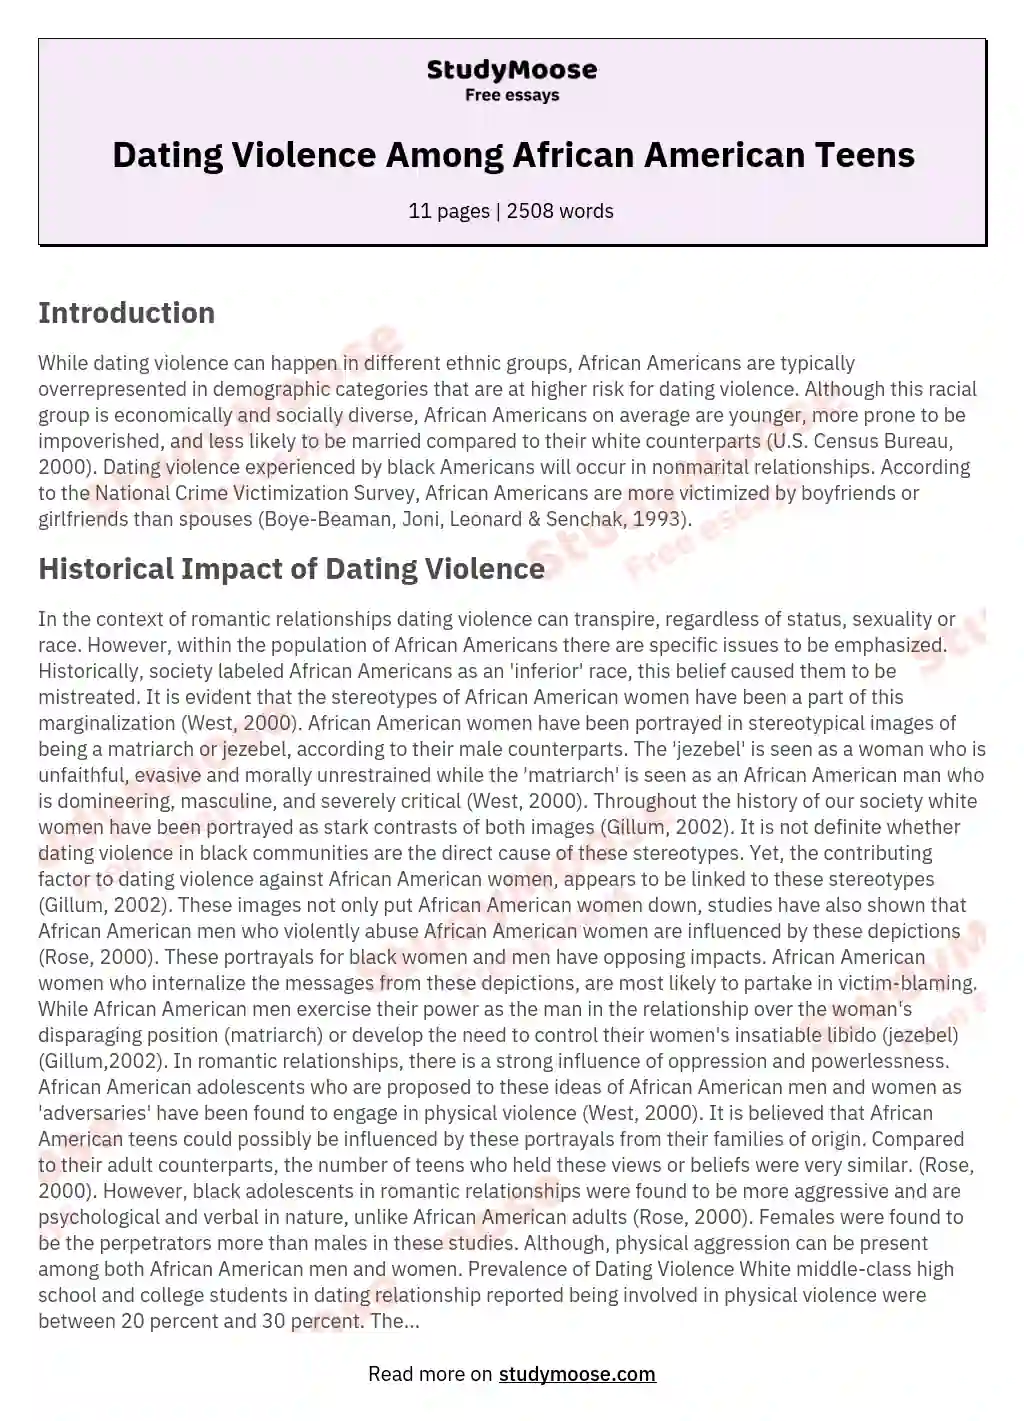 Dating Violence Among African American Teens essay